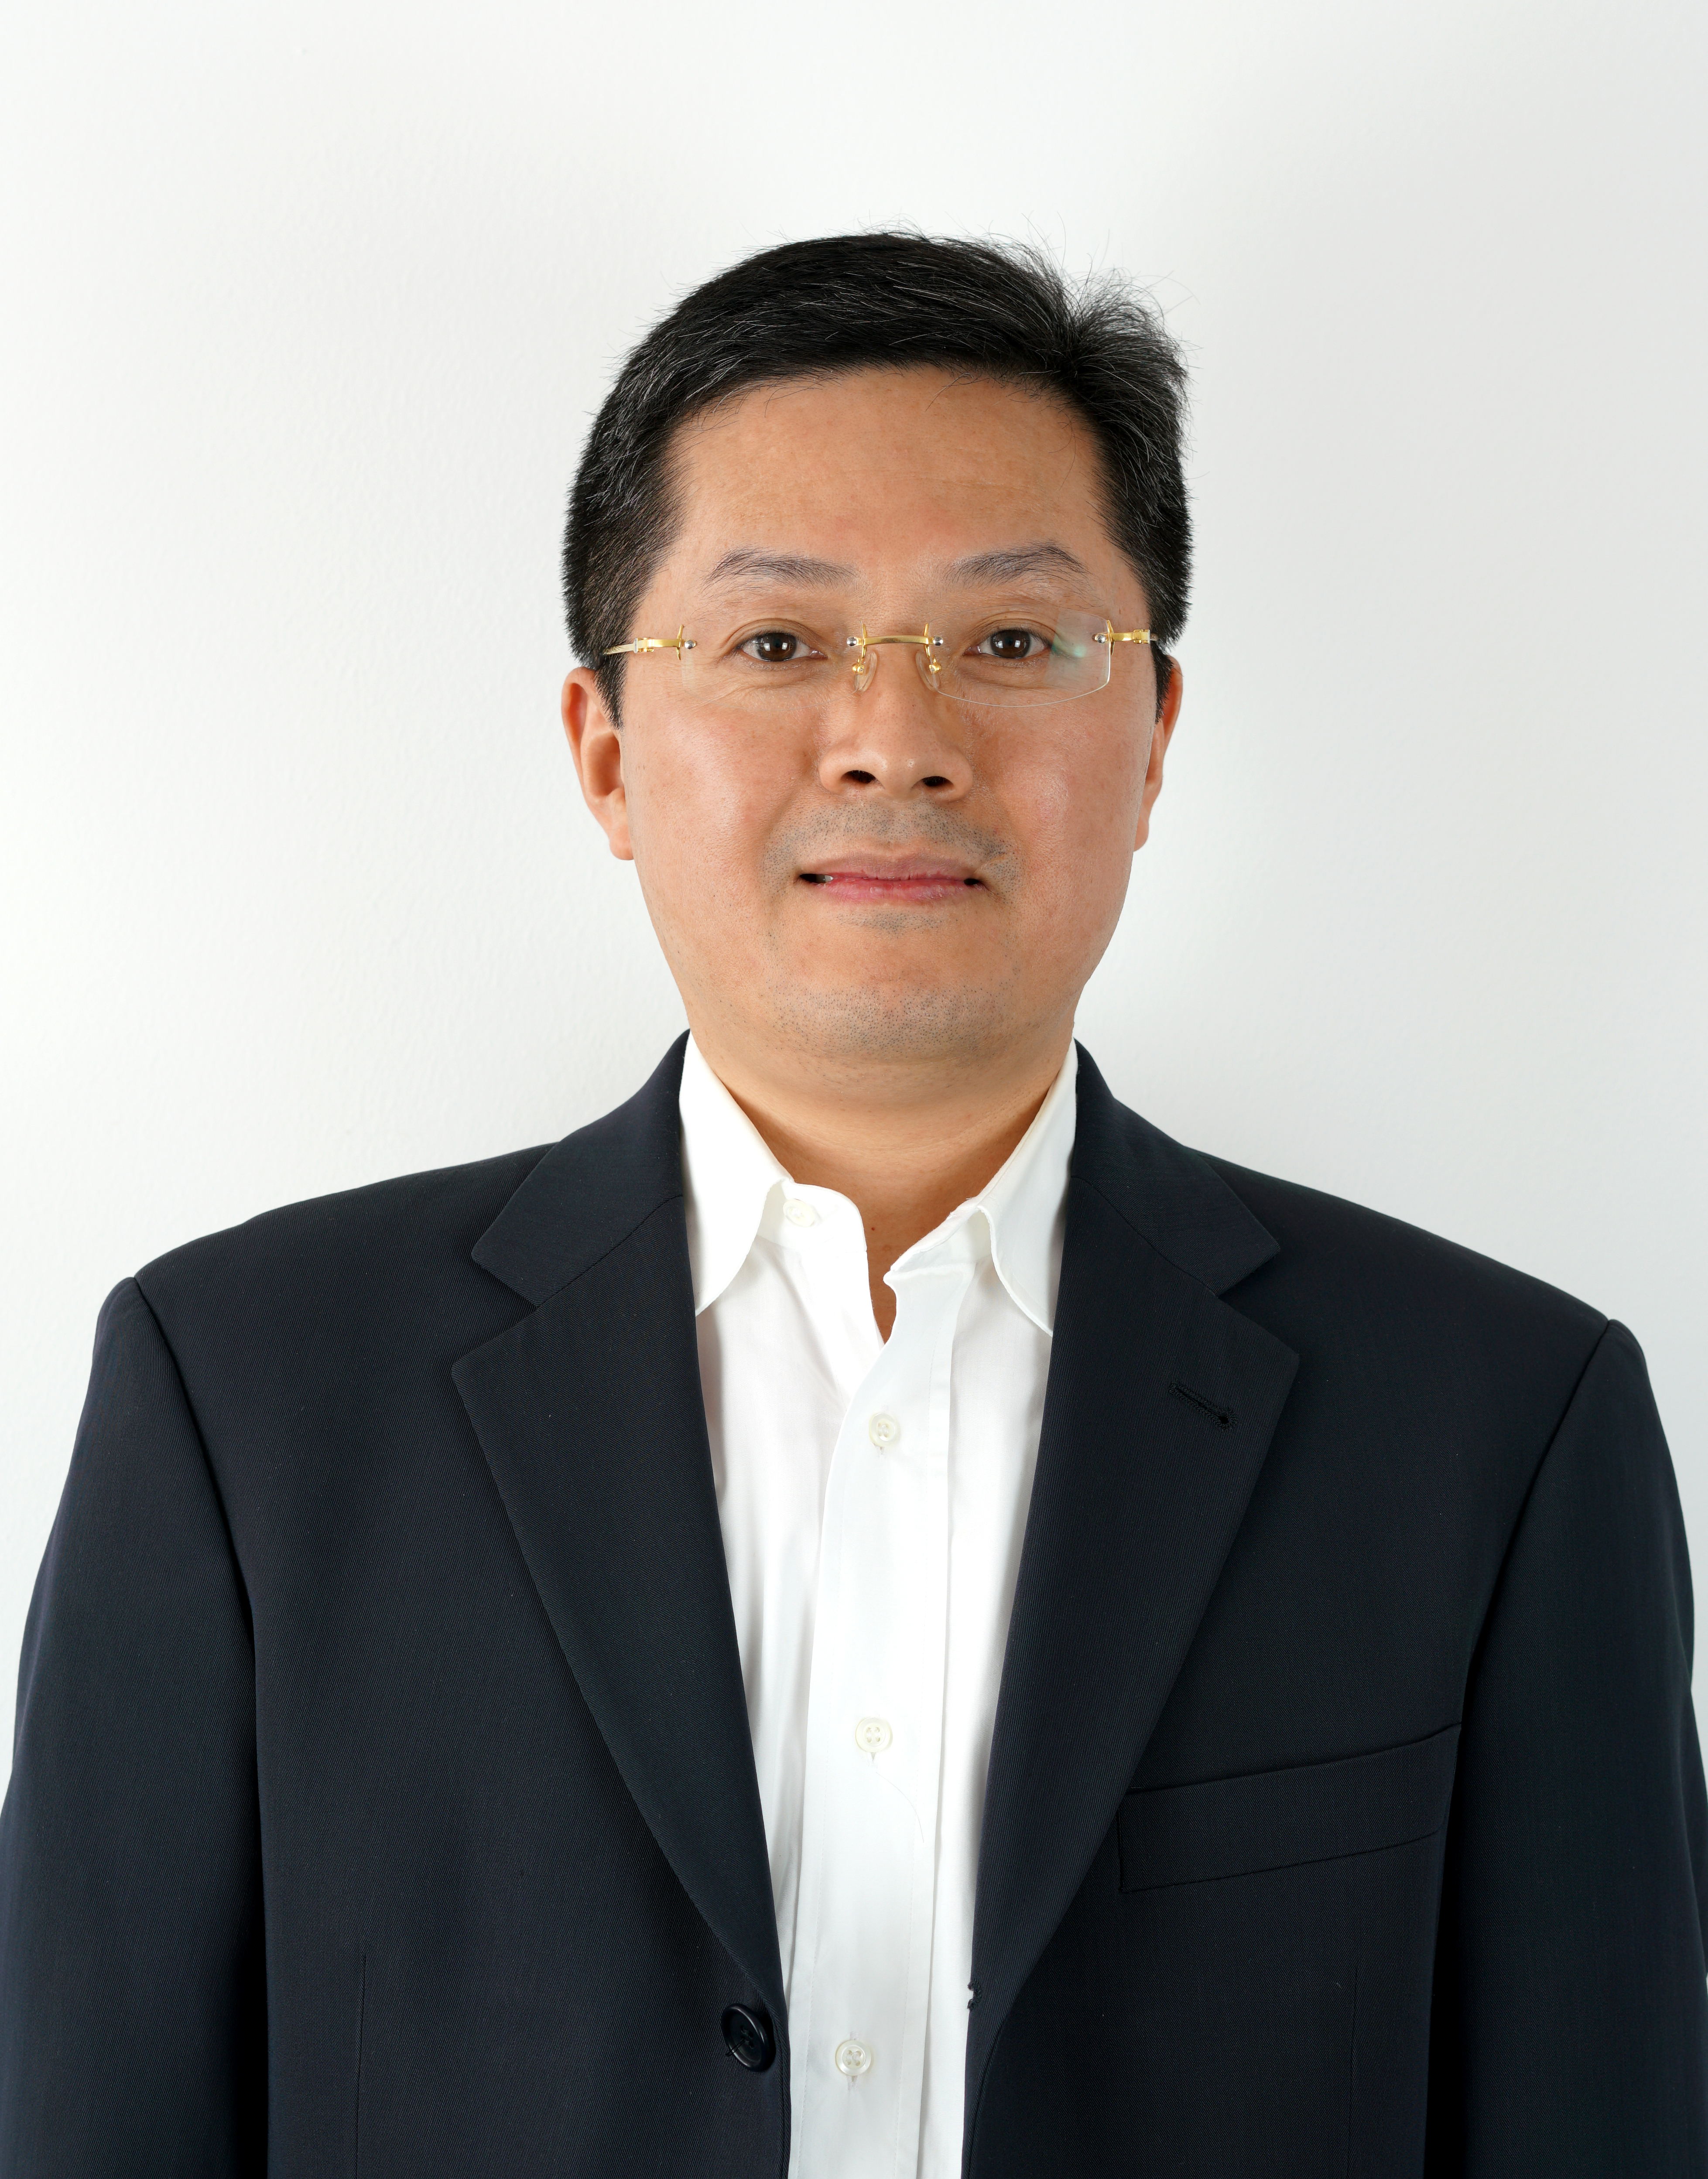 Mr. ZHANG Lin (Ernest) - President, Huawei Enterprise Business Group in Europe